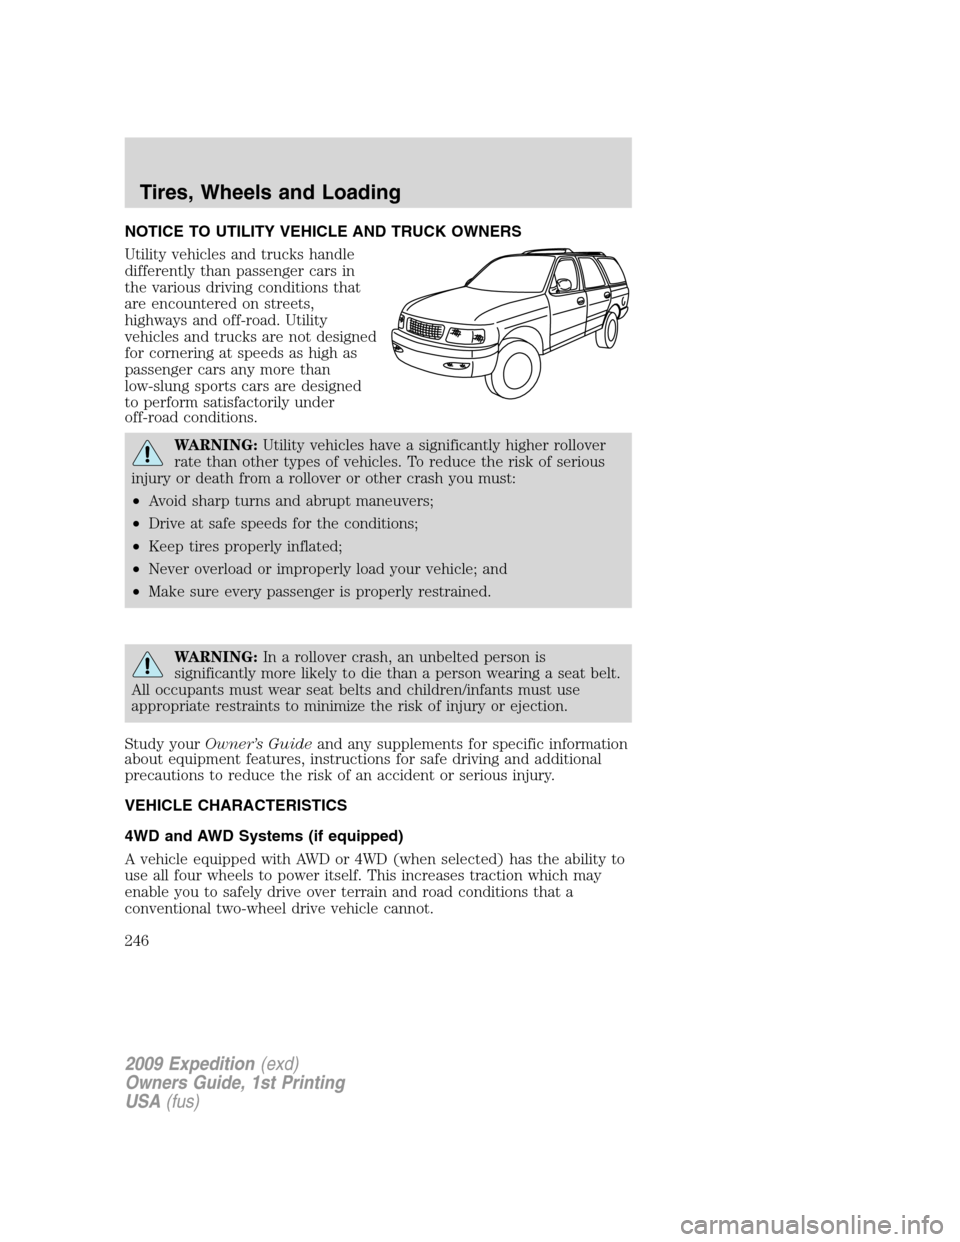 FORD EXPEDITION 2009 3.G Owners Manual NOTICE TO UTILITY VEHICLE AND TRUCK OWNERS
Utility vehicles and trucks handle
differently than passenger cars in
the various driving conditions that
are encountered on streets,
highways and off-road. 